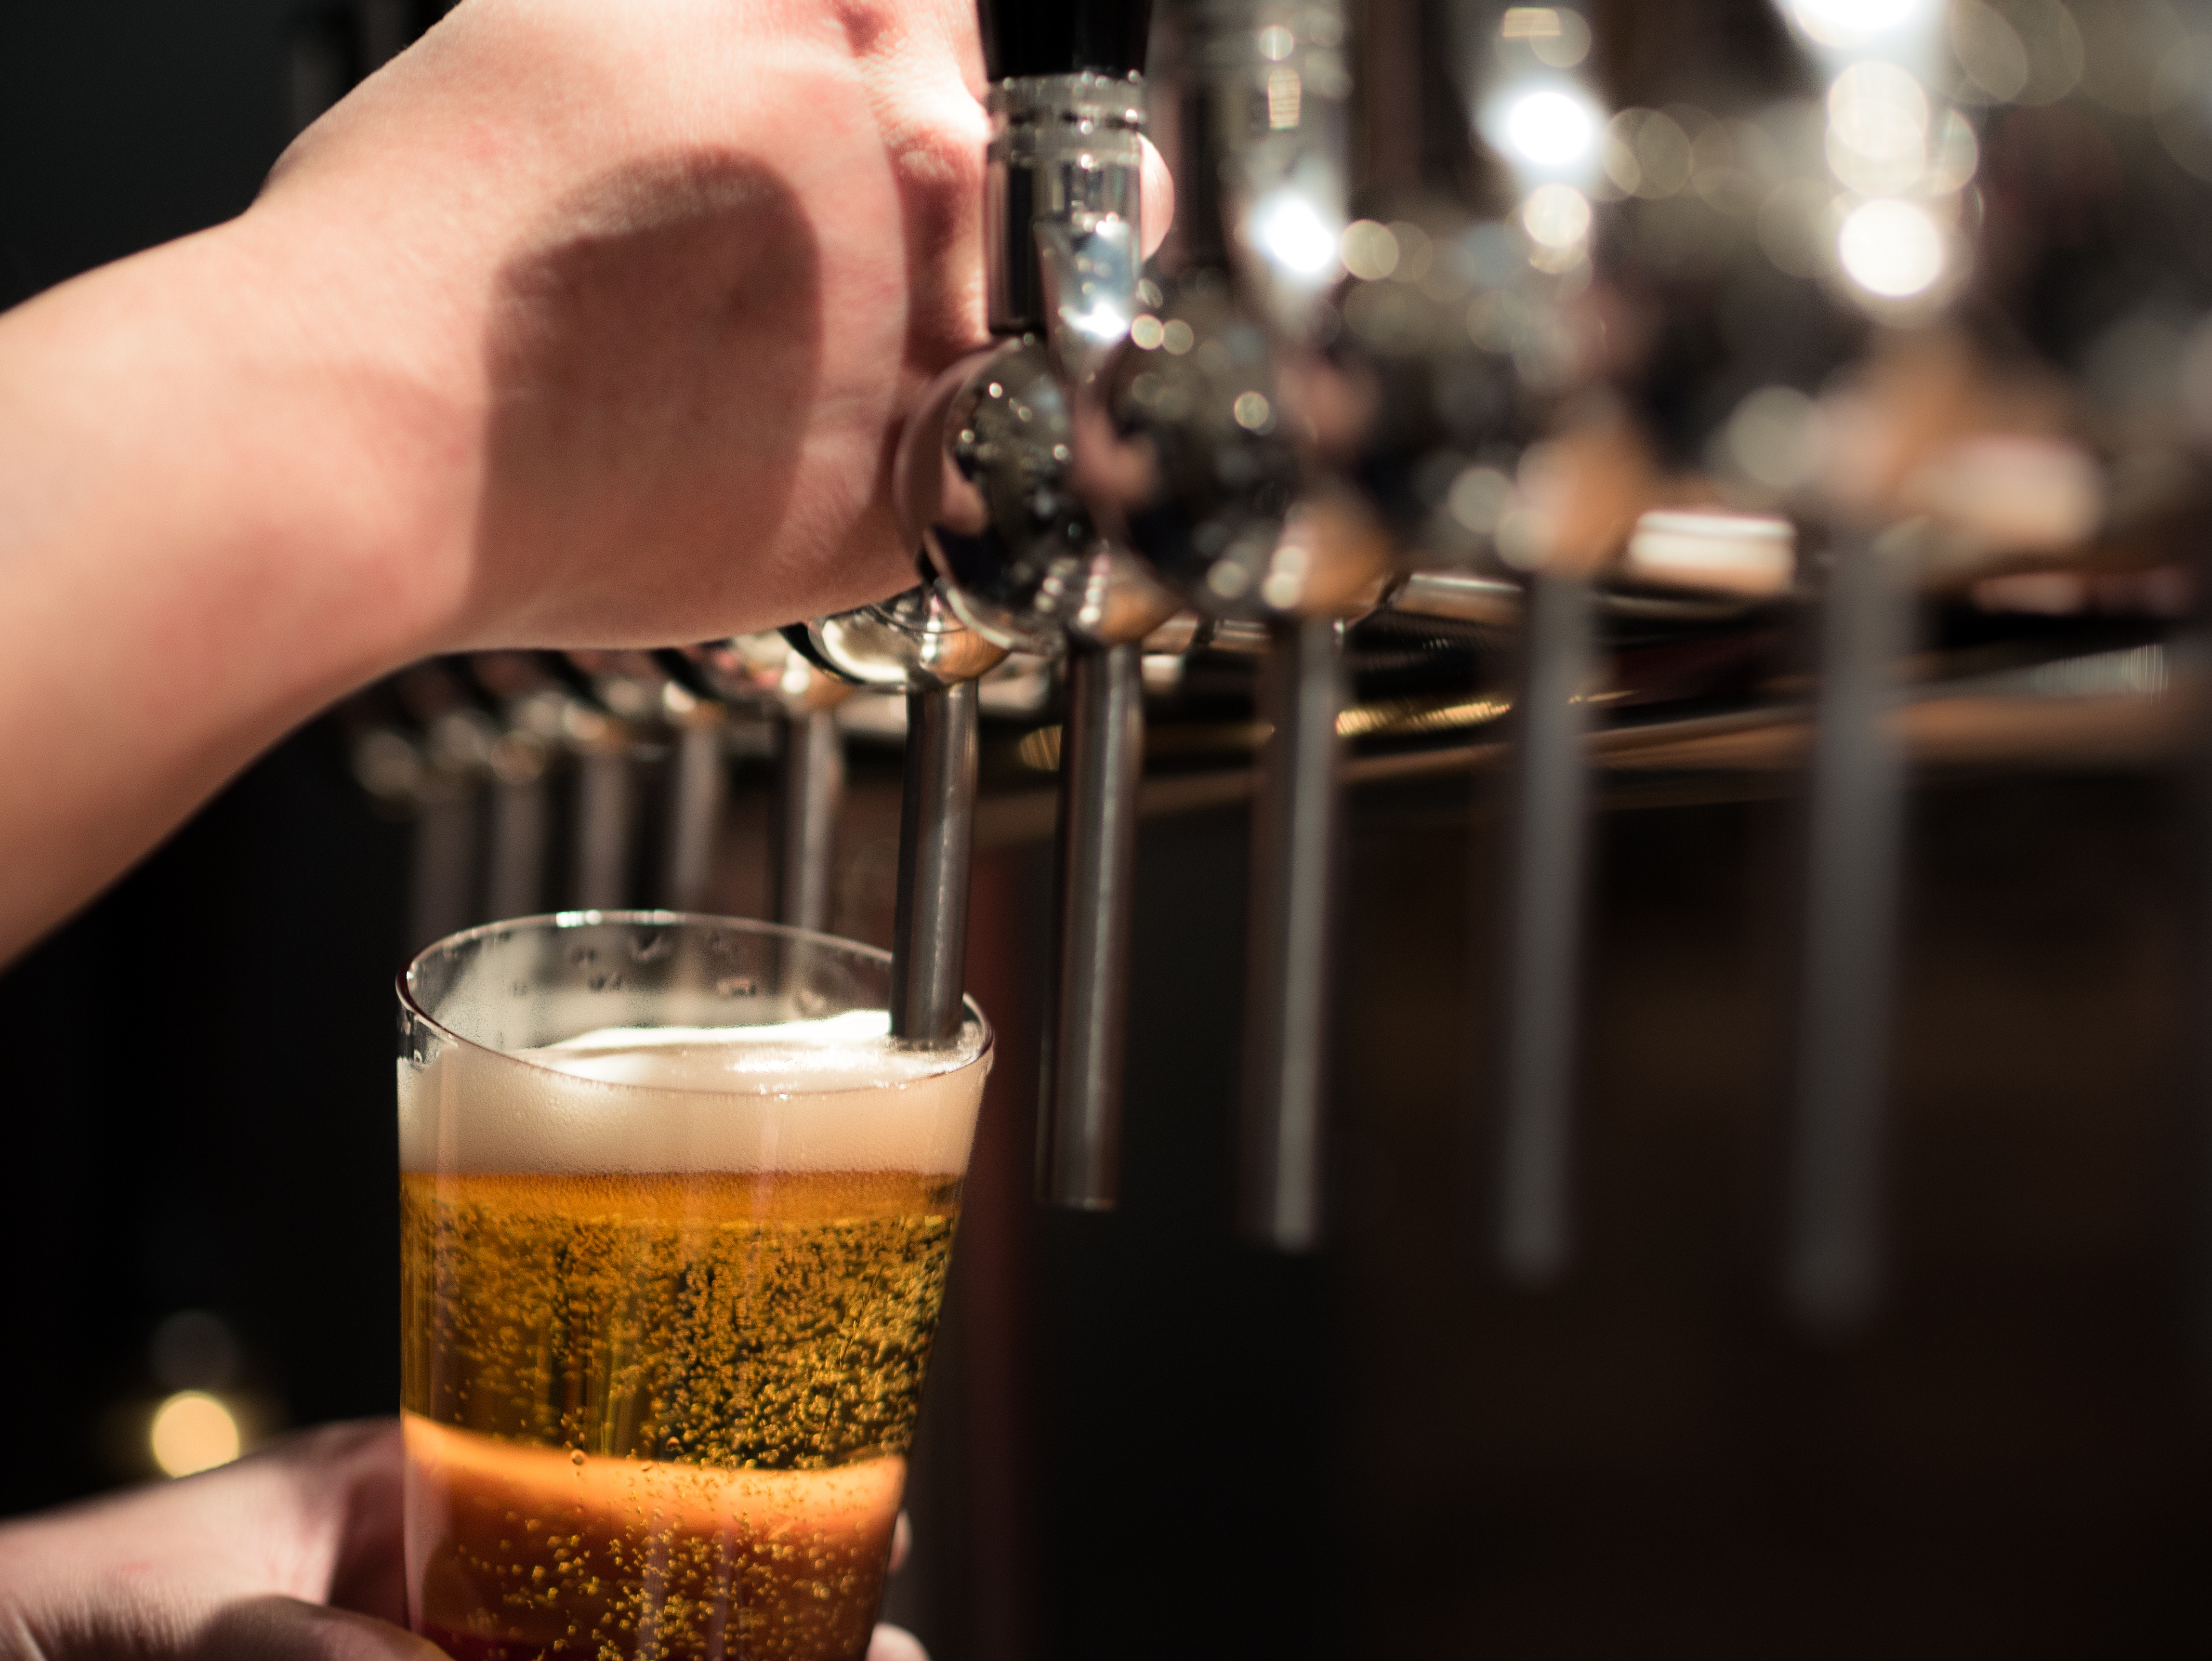 A craft beer tap at a cafe. (Getty Images/Flickr RF)